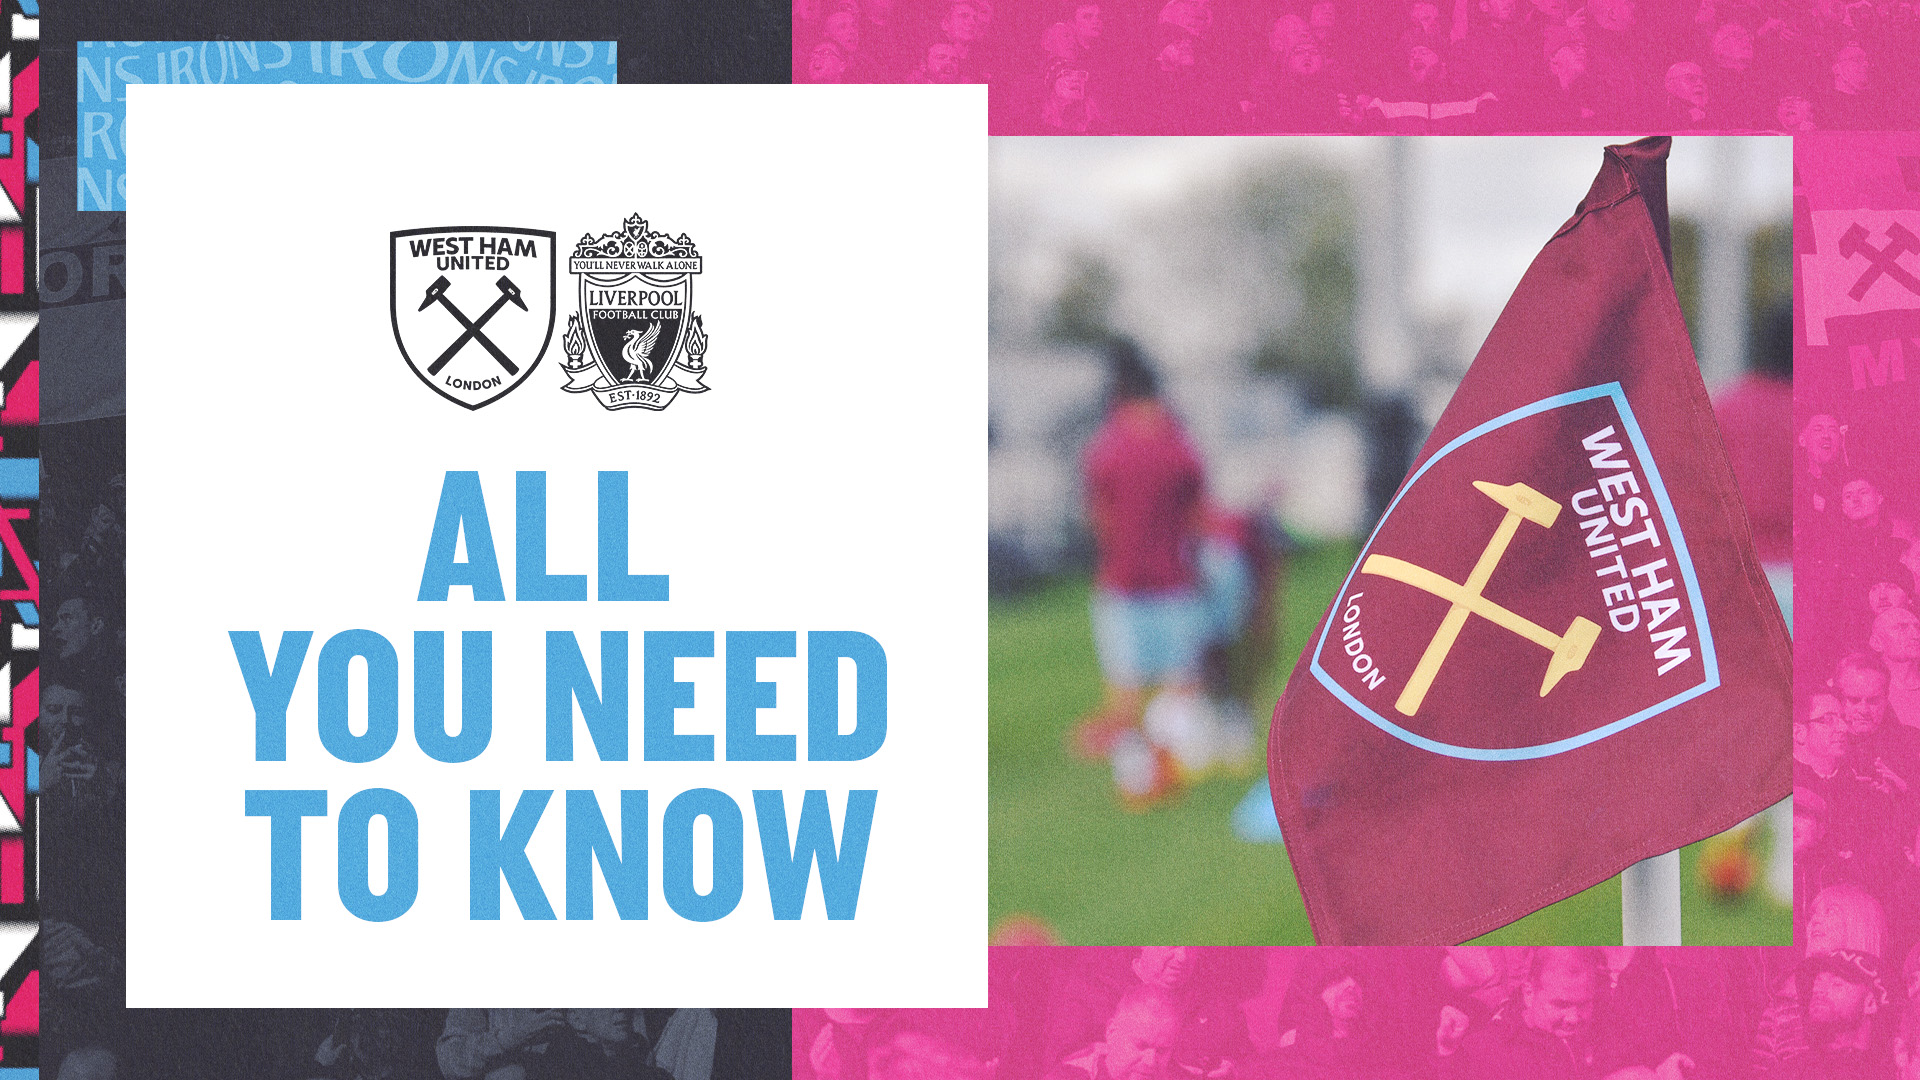 West Ham United U21s v Liverpool U21s - All You Need To Know